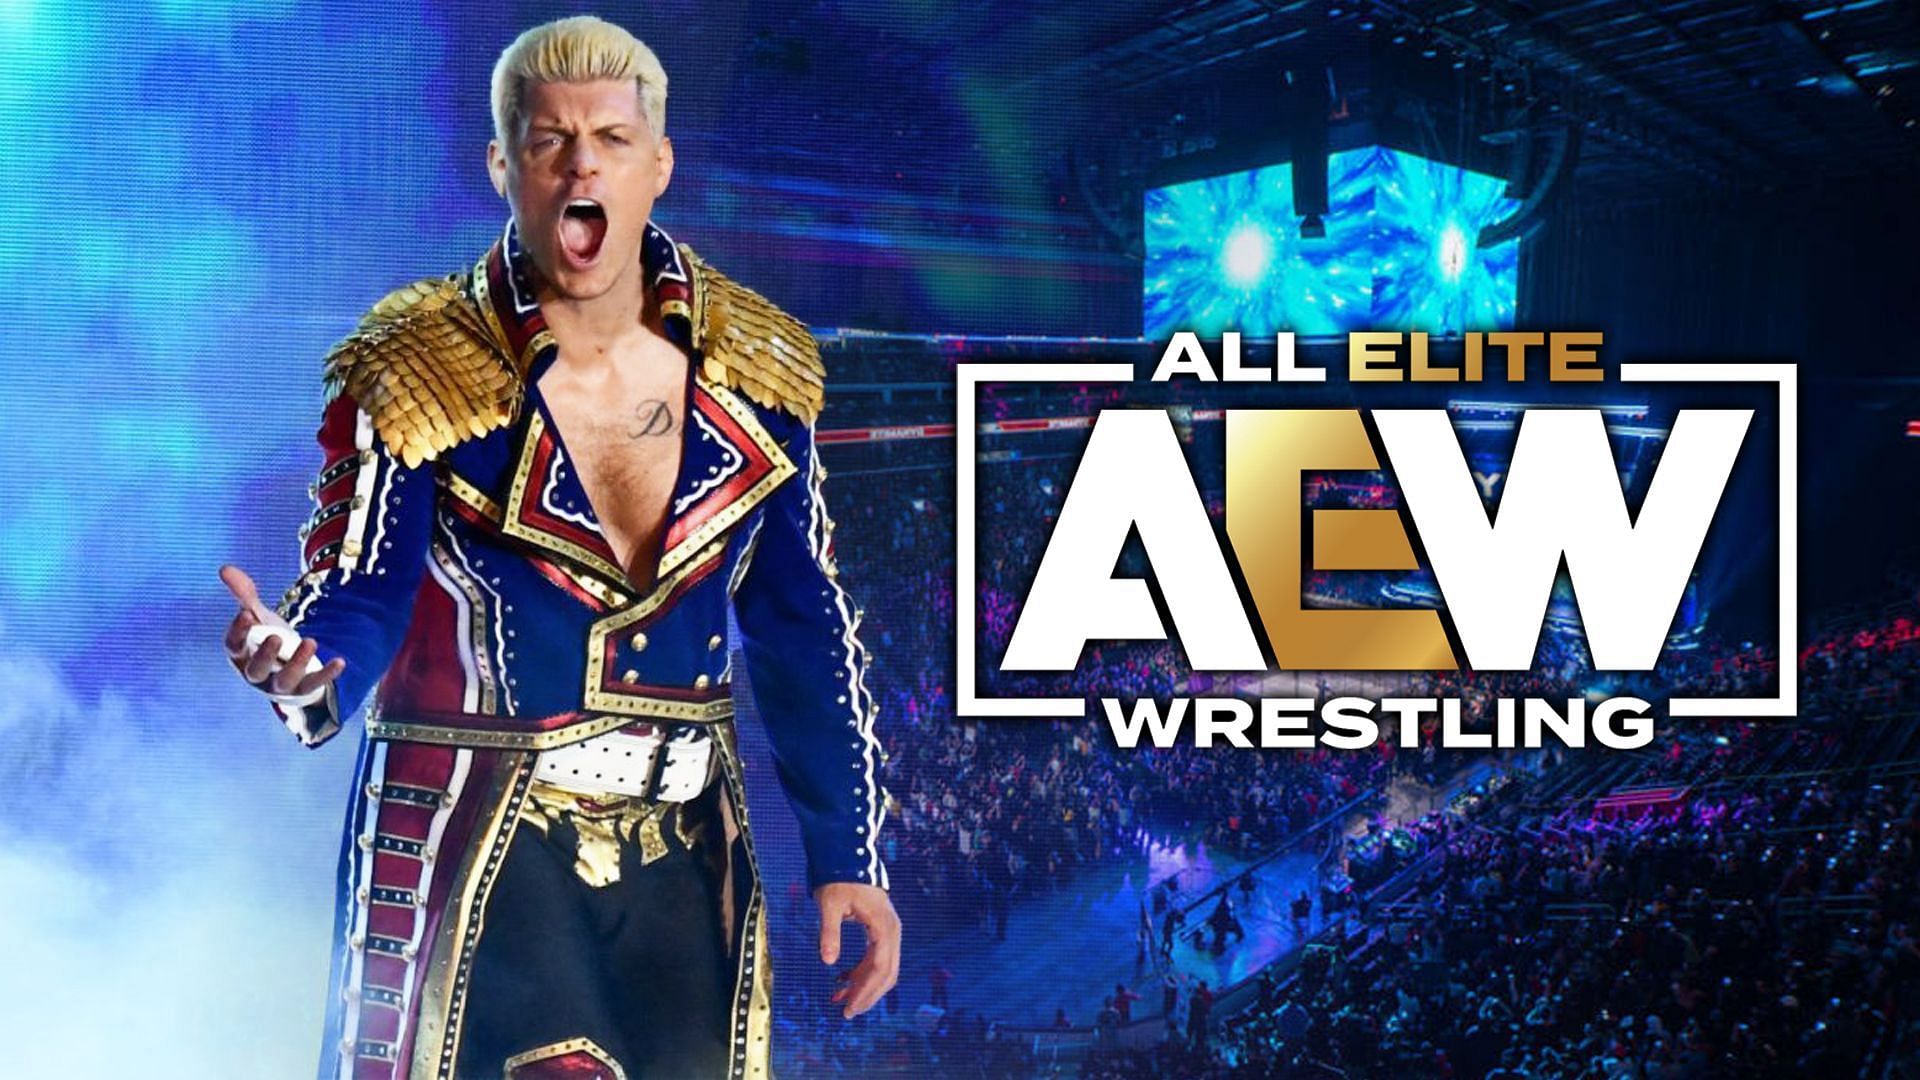 Grabbing Lunch with Cody Rhodes: AEW Personality Extends Invite to Share a Meal